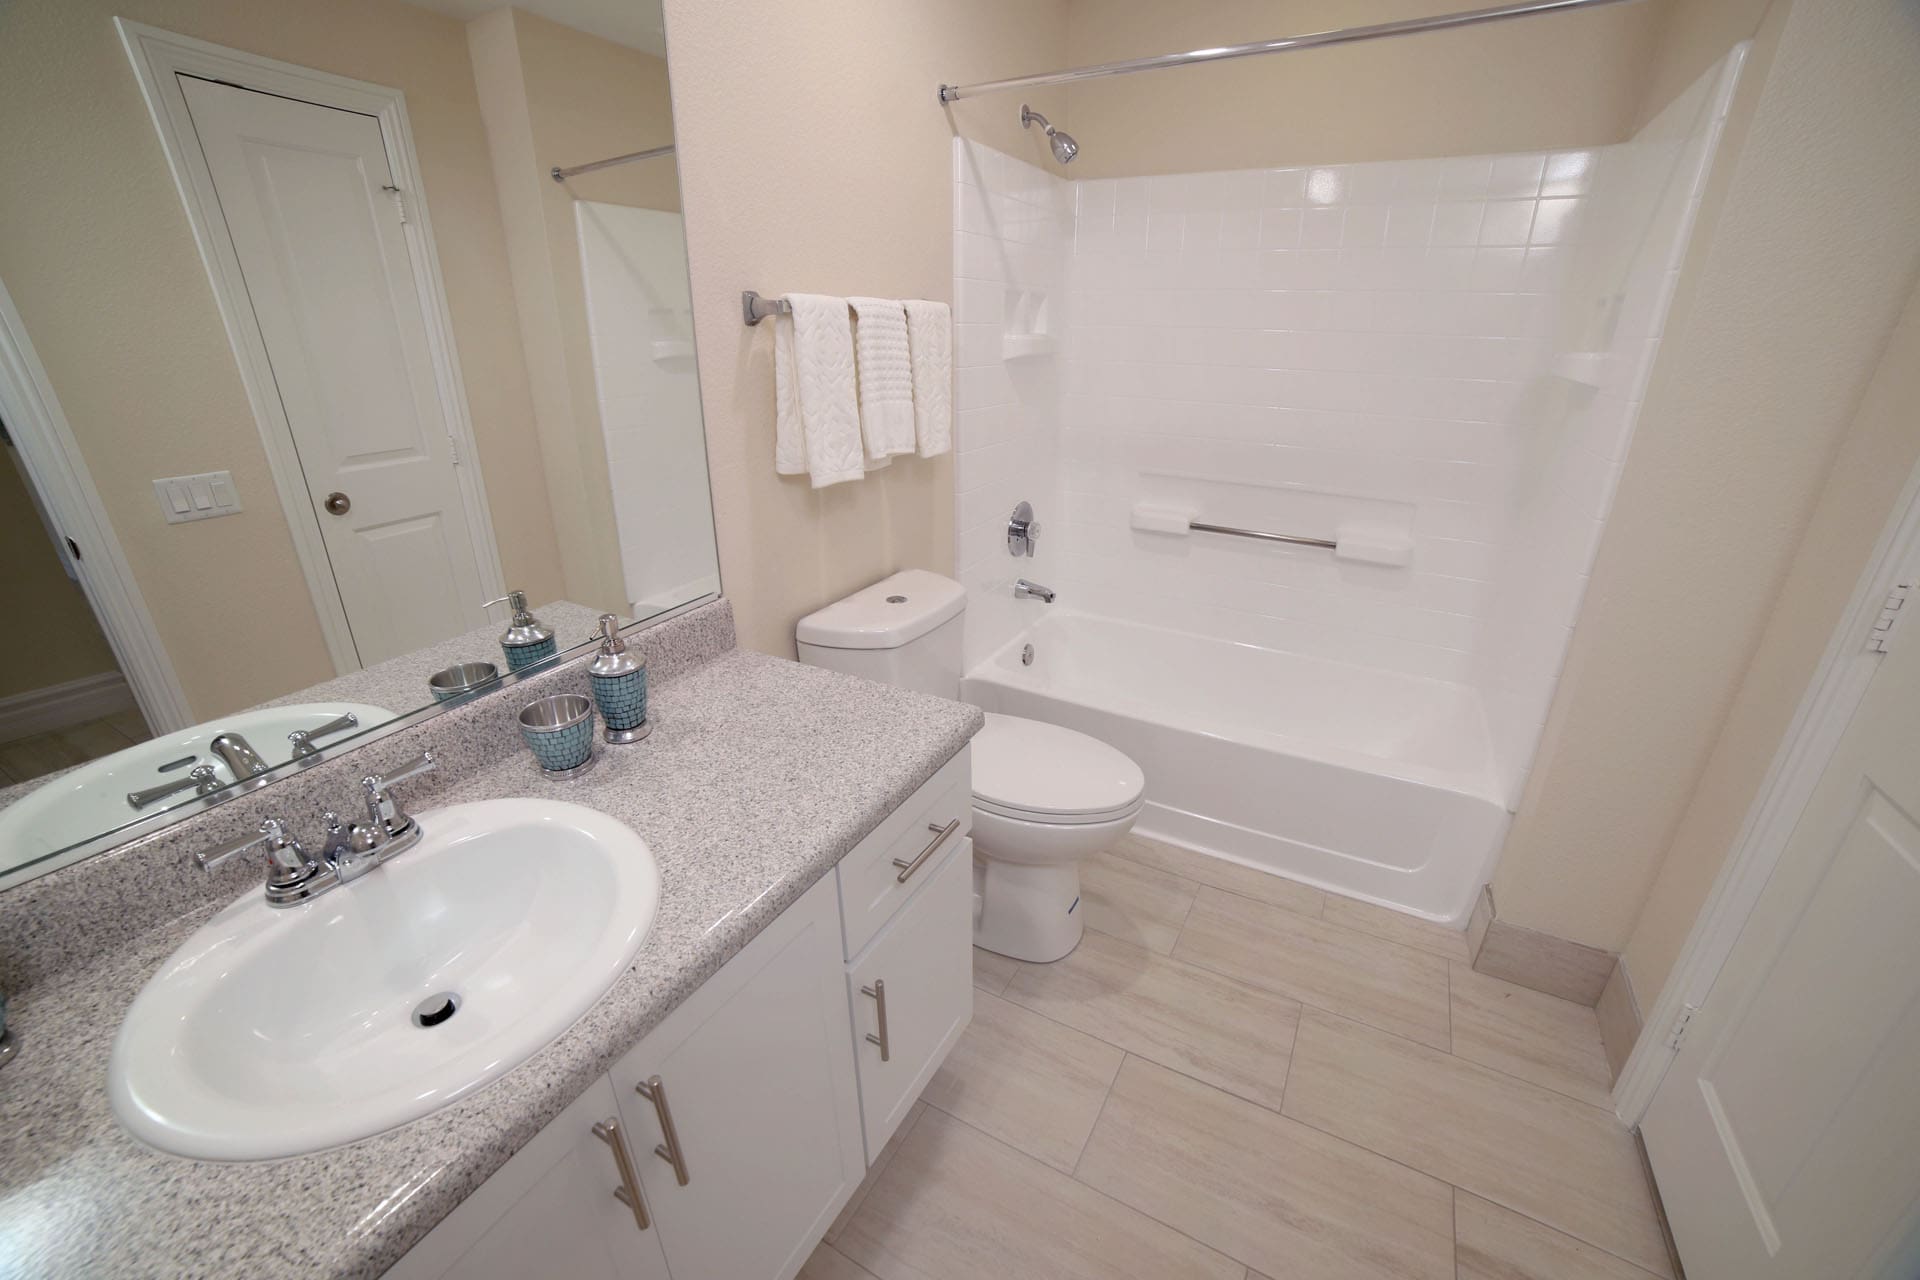 Aliso Viejo Apartments-Aventine Apartments Bathroom with Gorgeous Lighting, a Large Shower and Tub Area, and Spacious Vanity Area